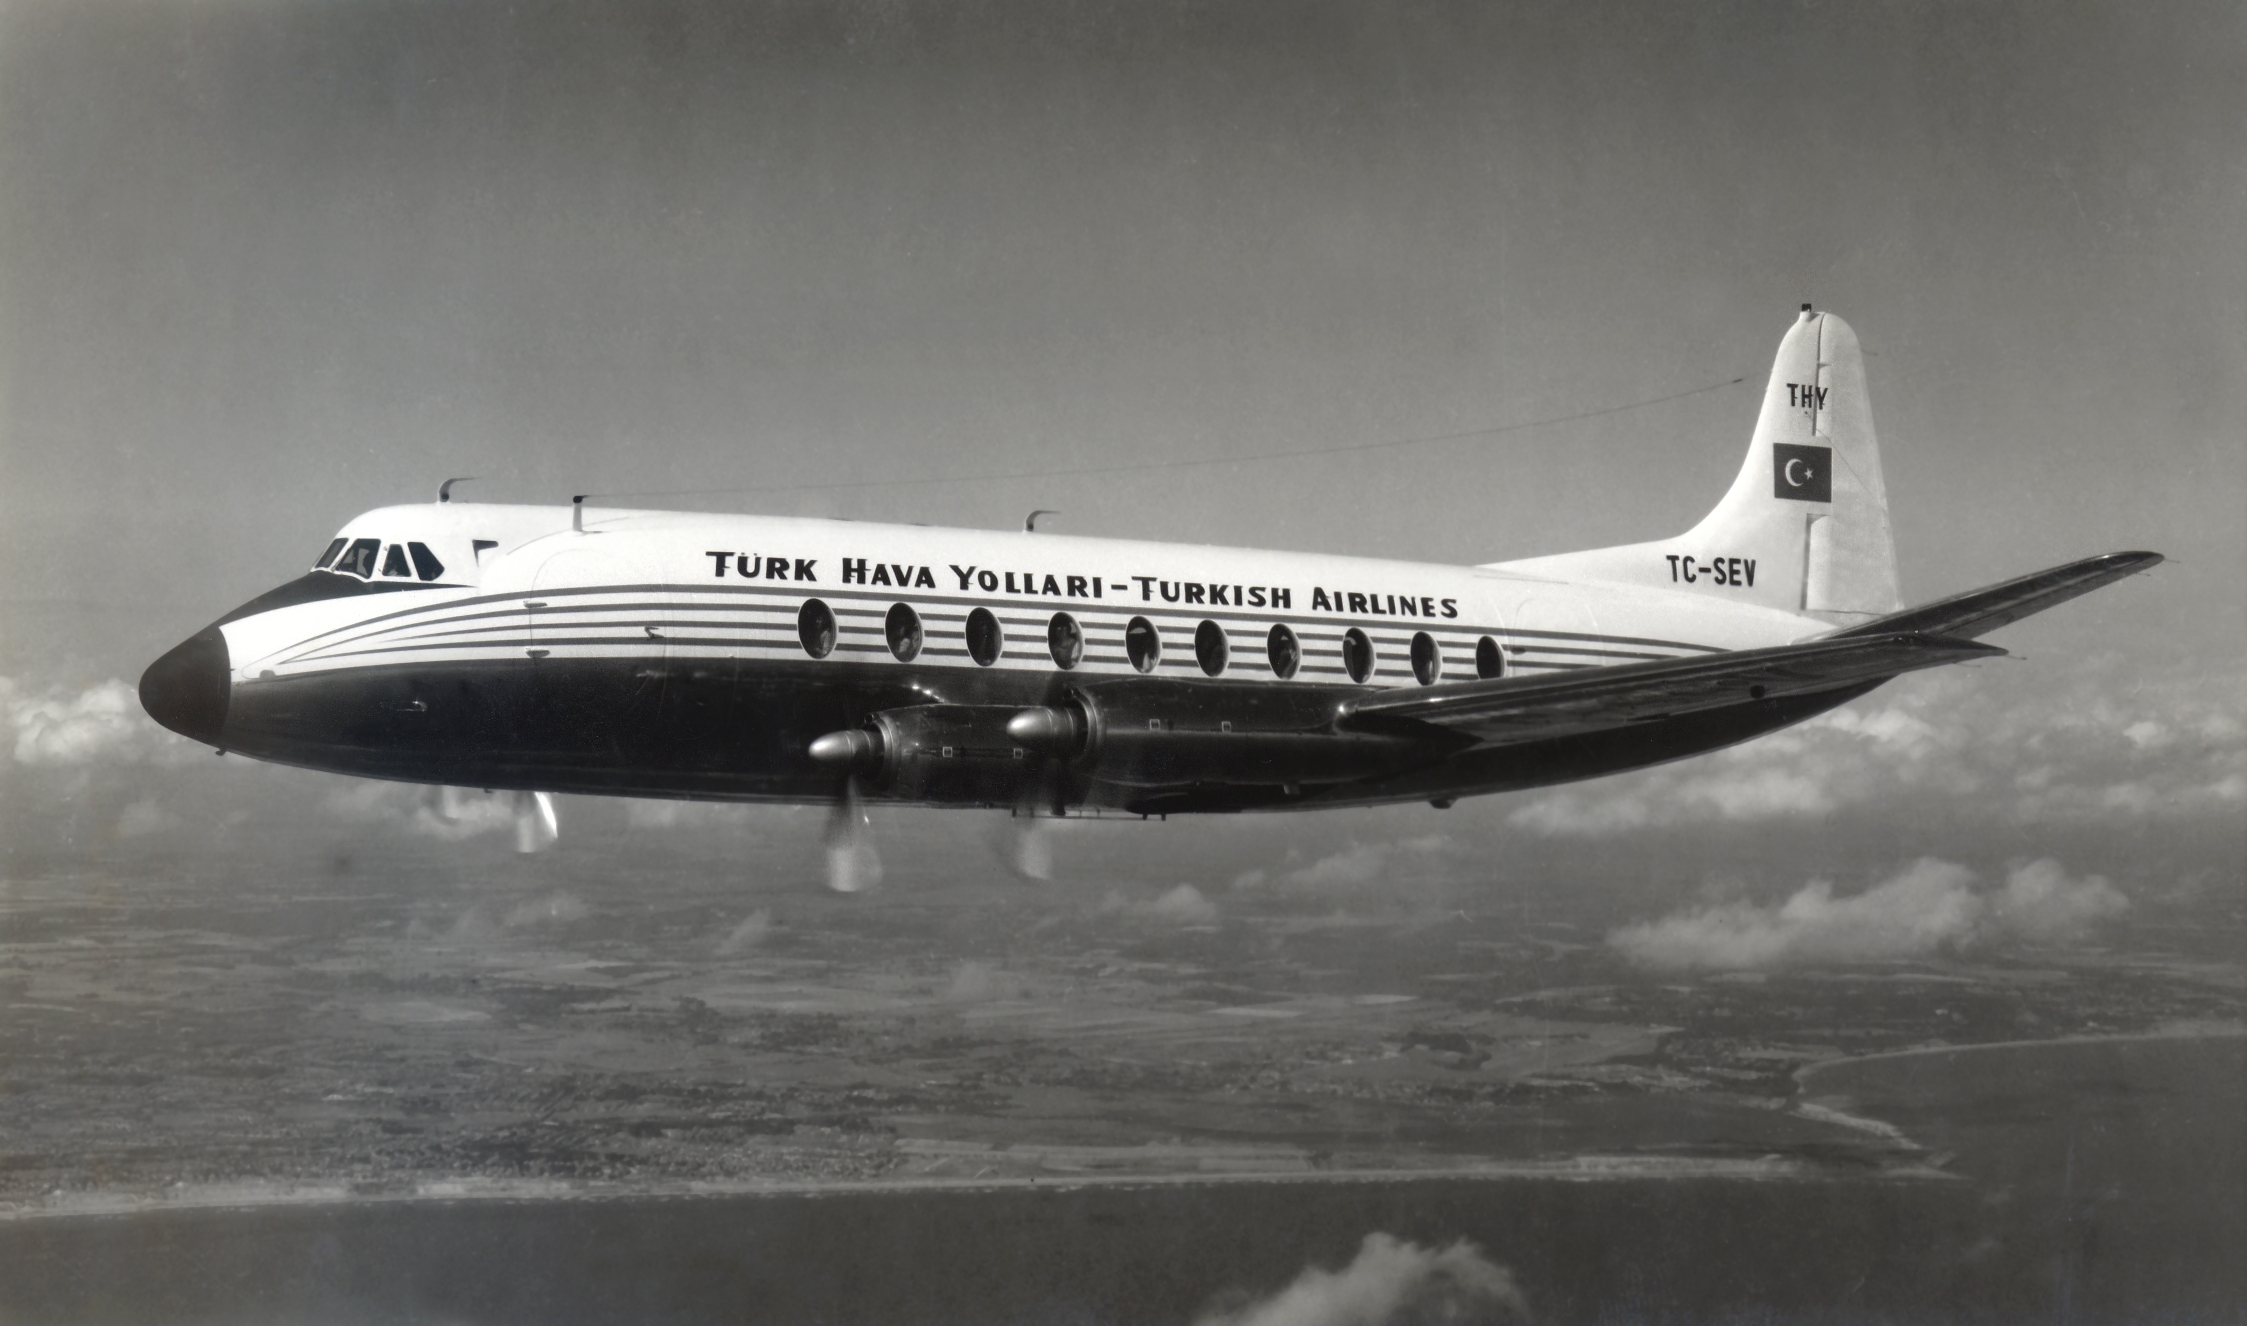 Vickers Viscount: The First Turbo Prop Plane in the World